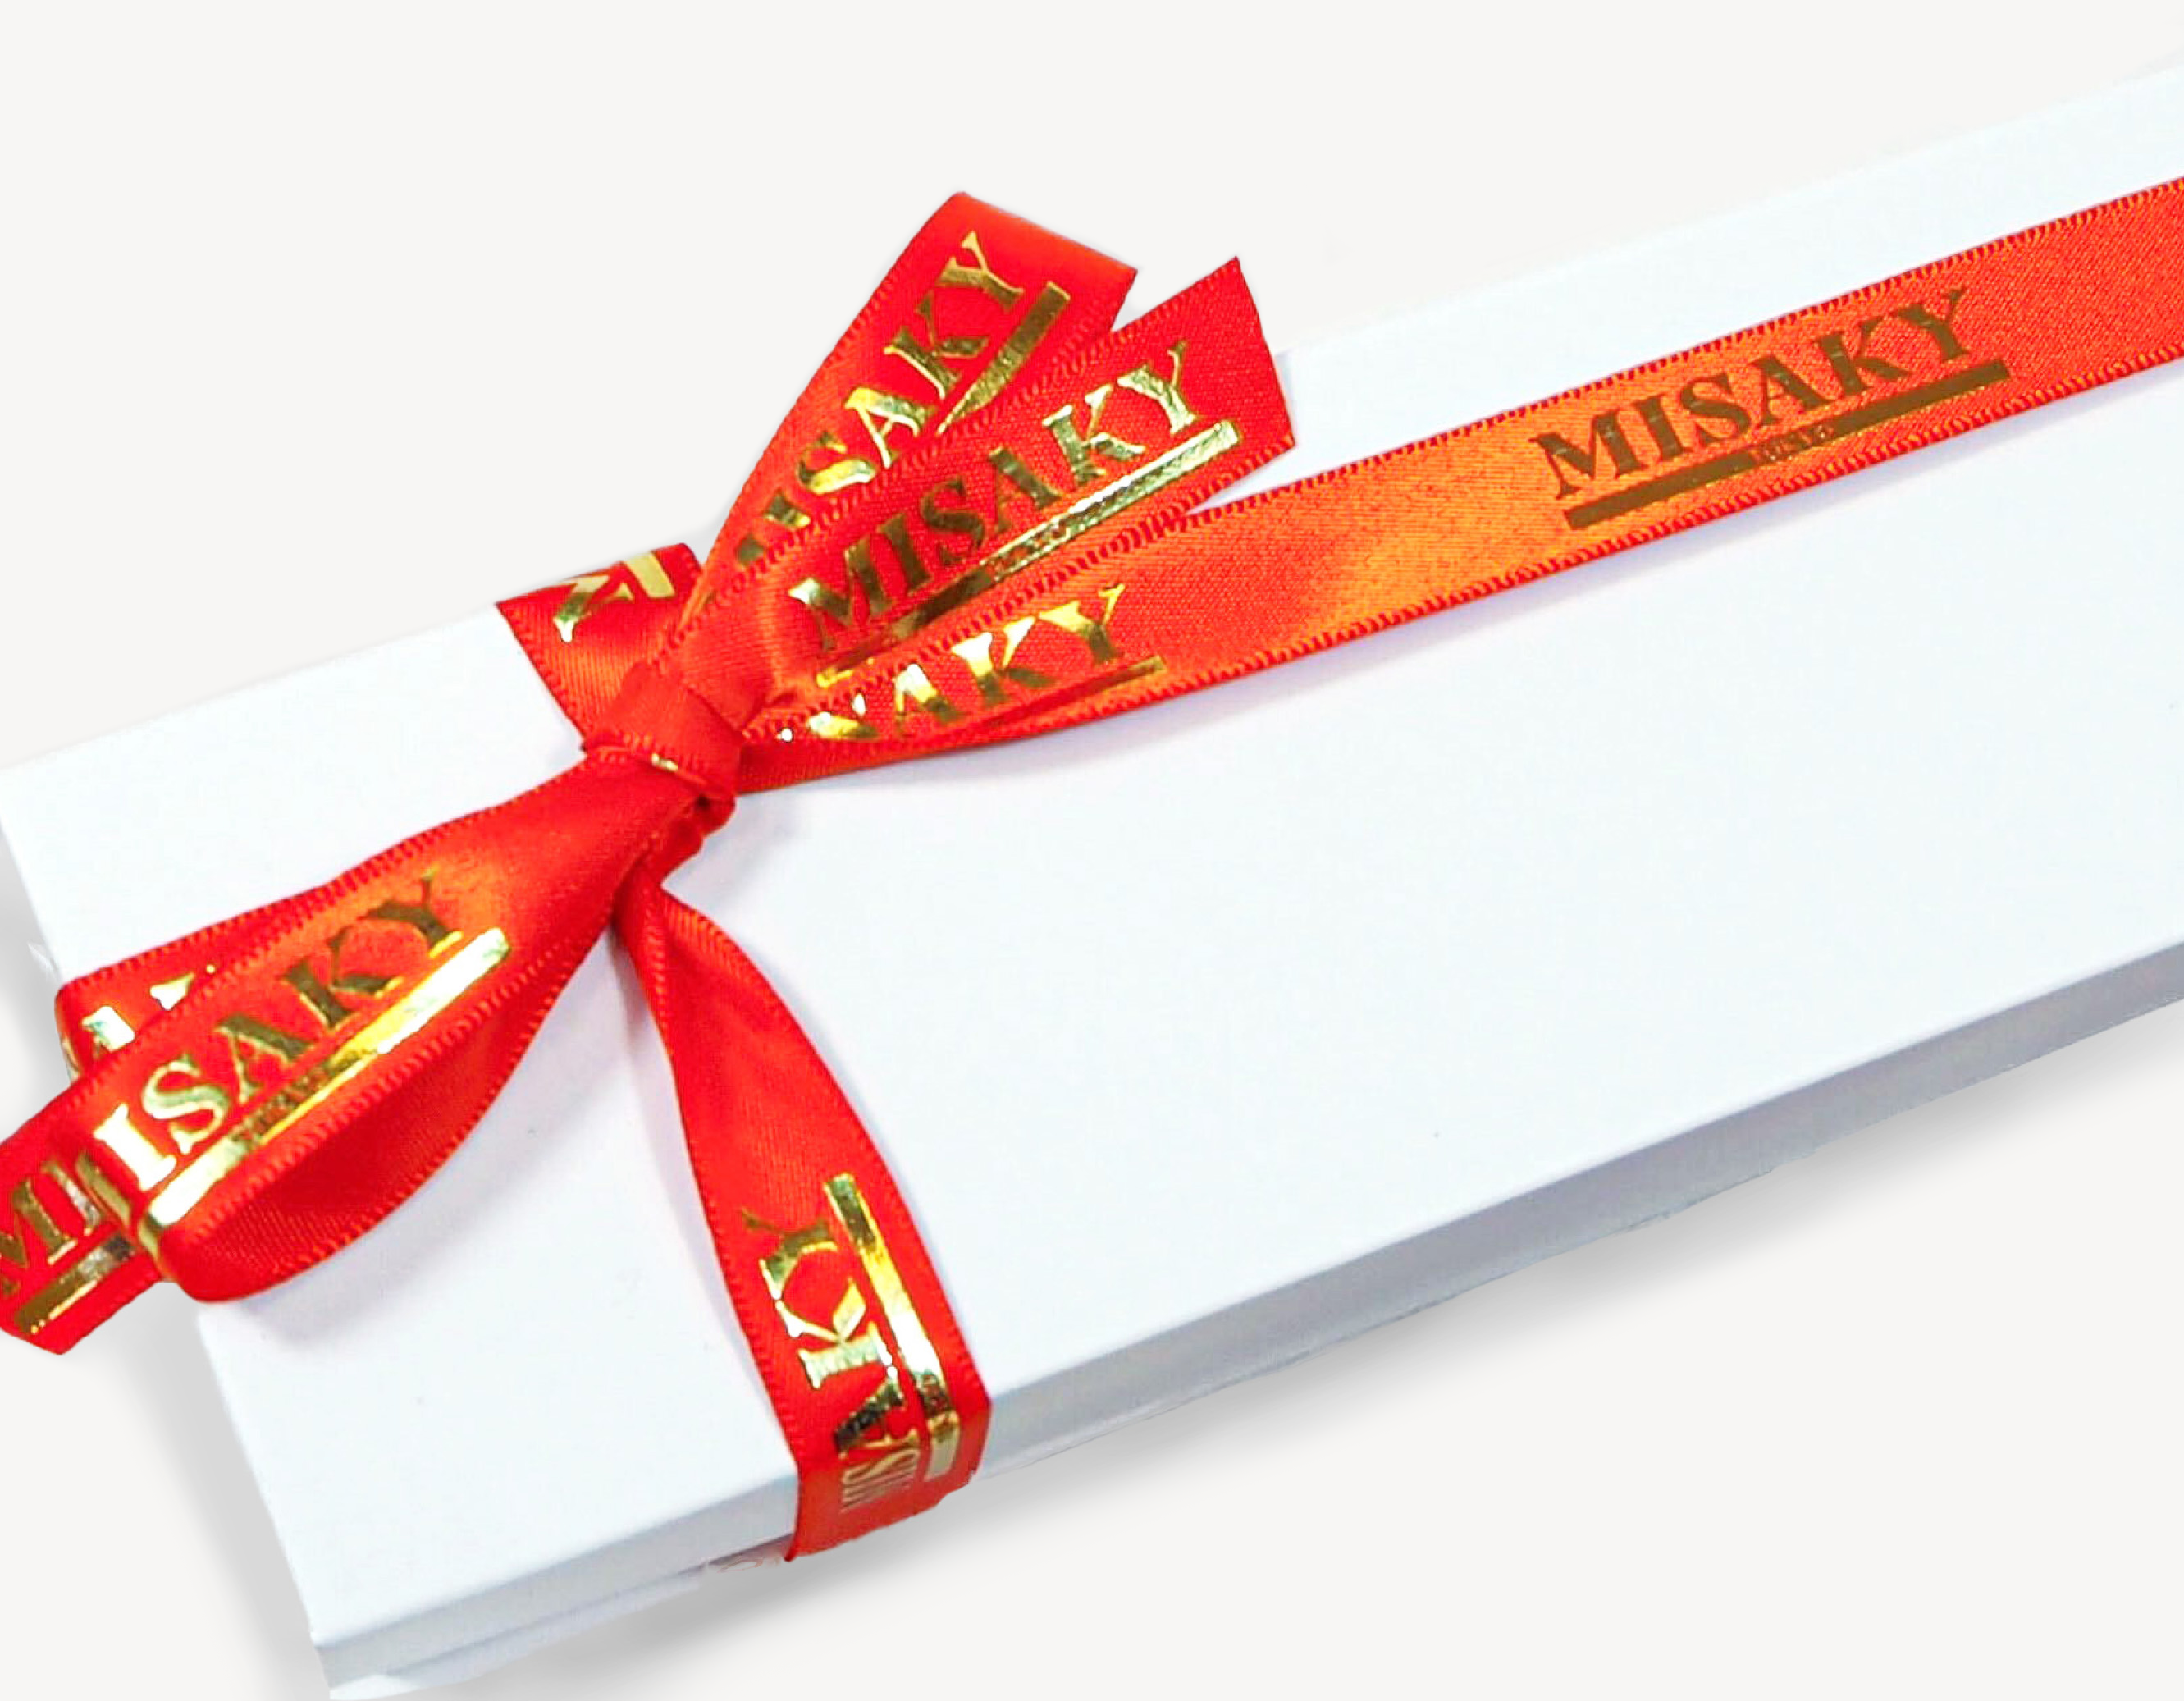 An elegant white gift box tied with a red ribbon that has the word 'MISAKI' printed in gold letters, presented on a white background